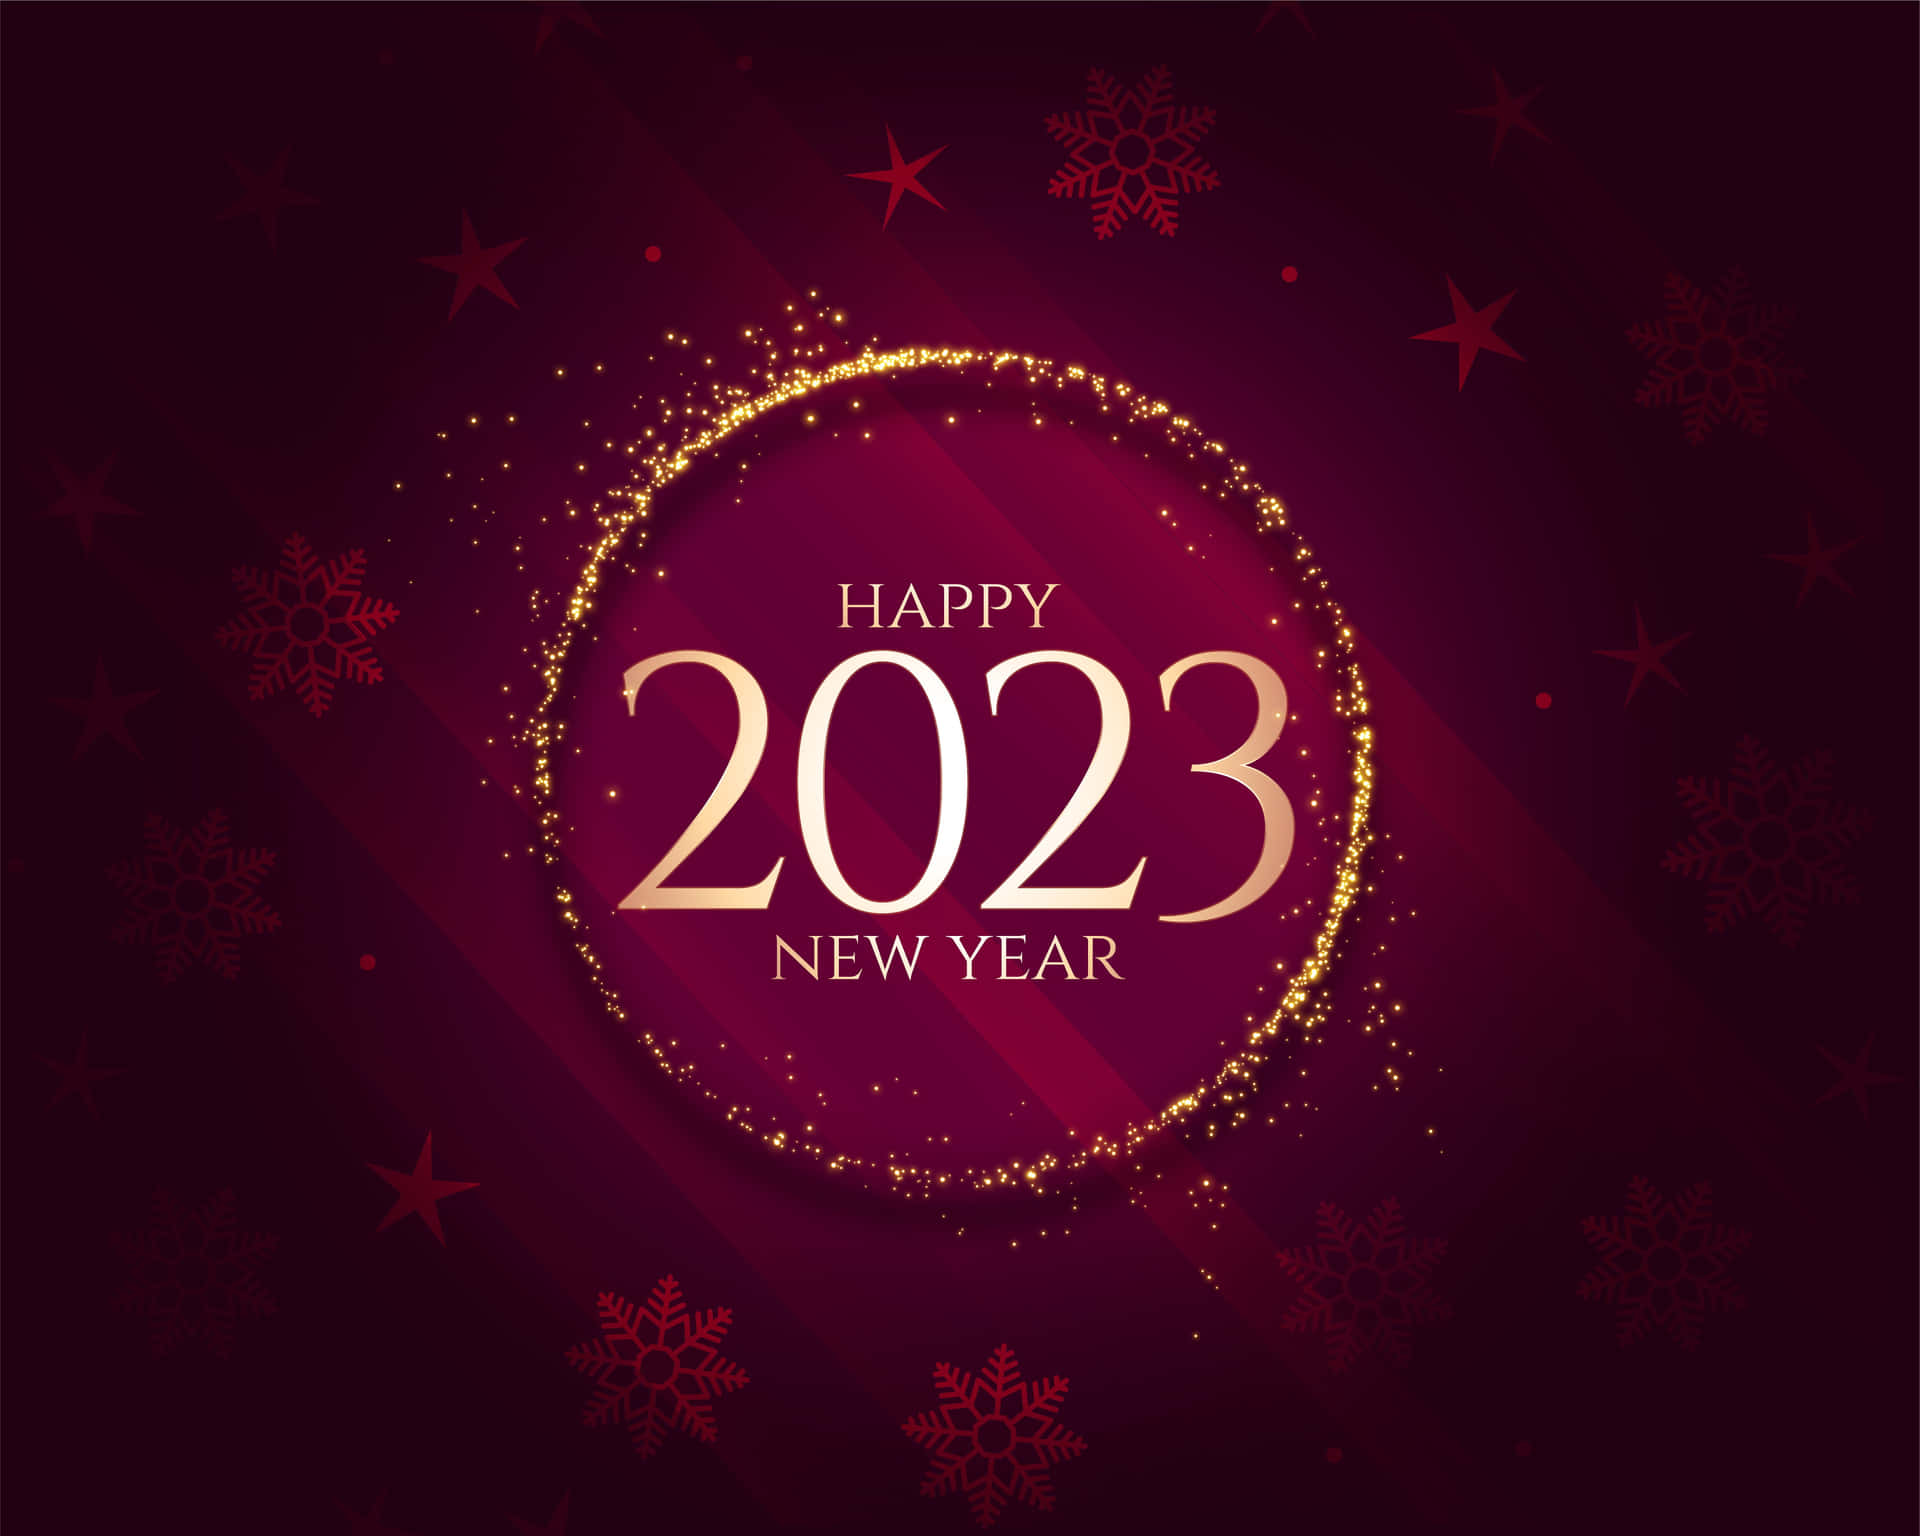 happy new year 2023 with golden background